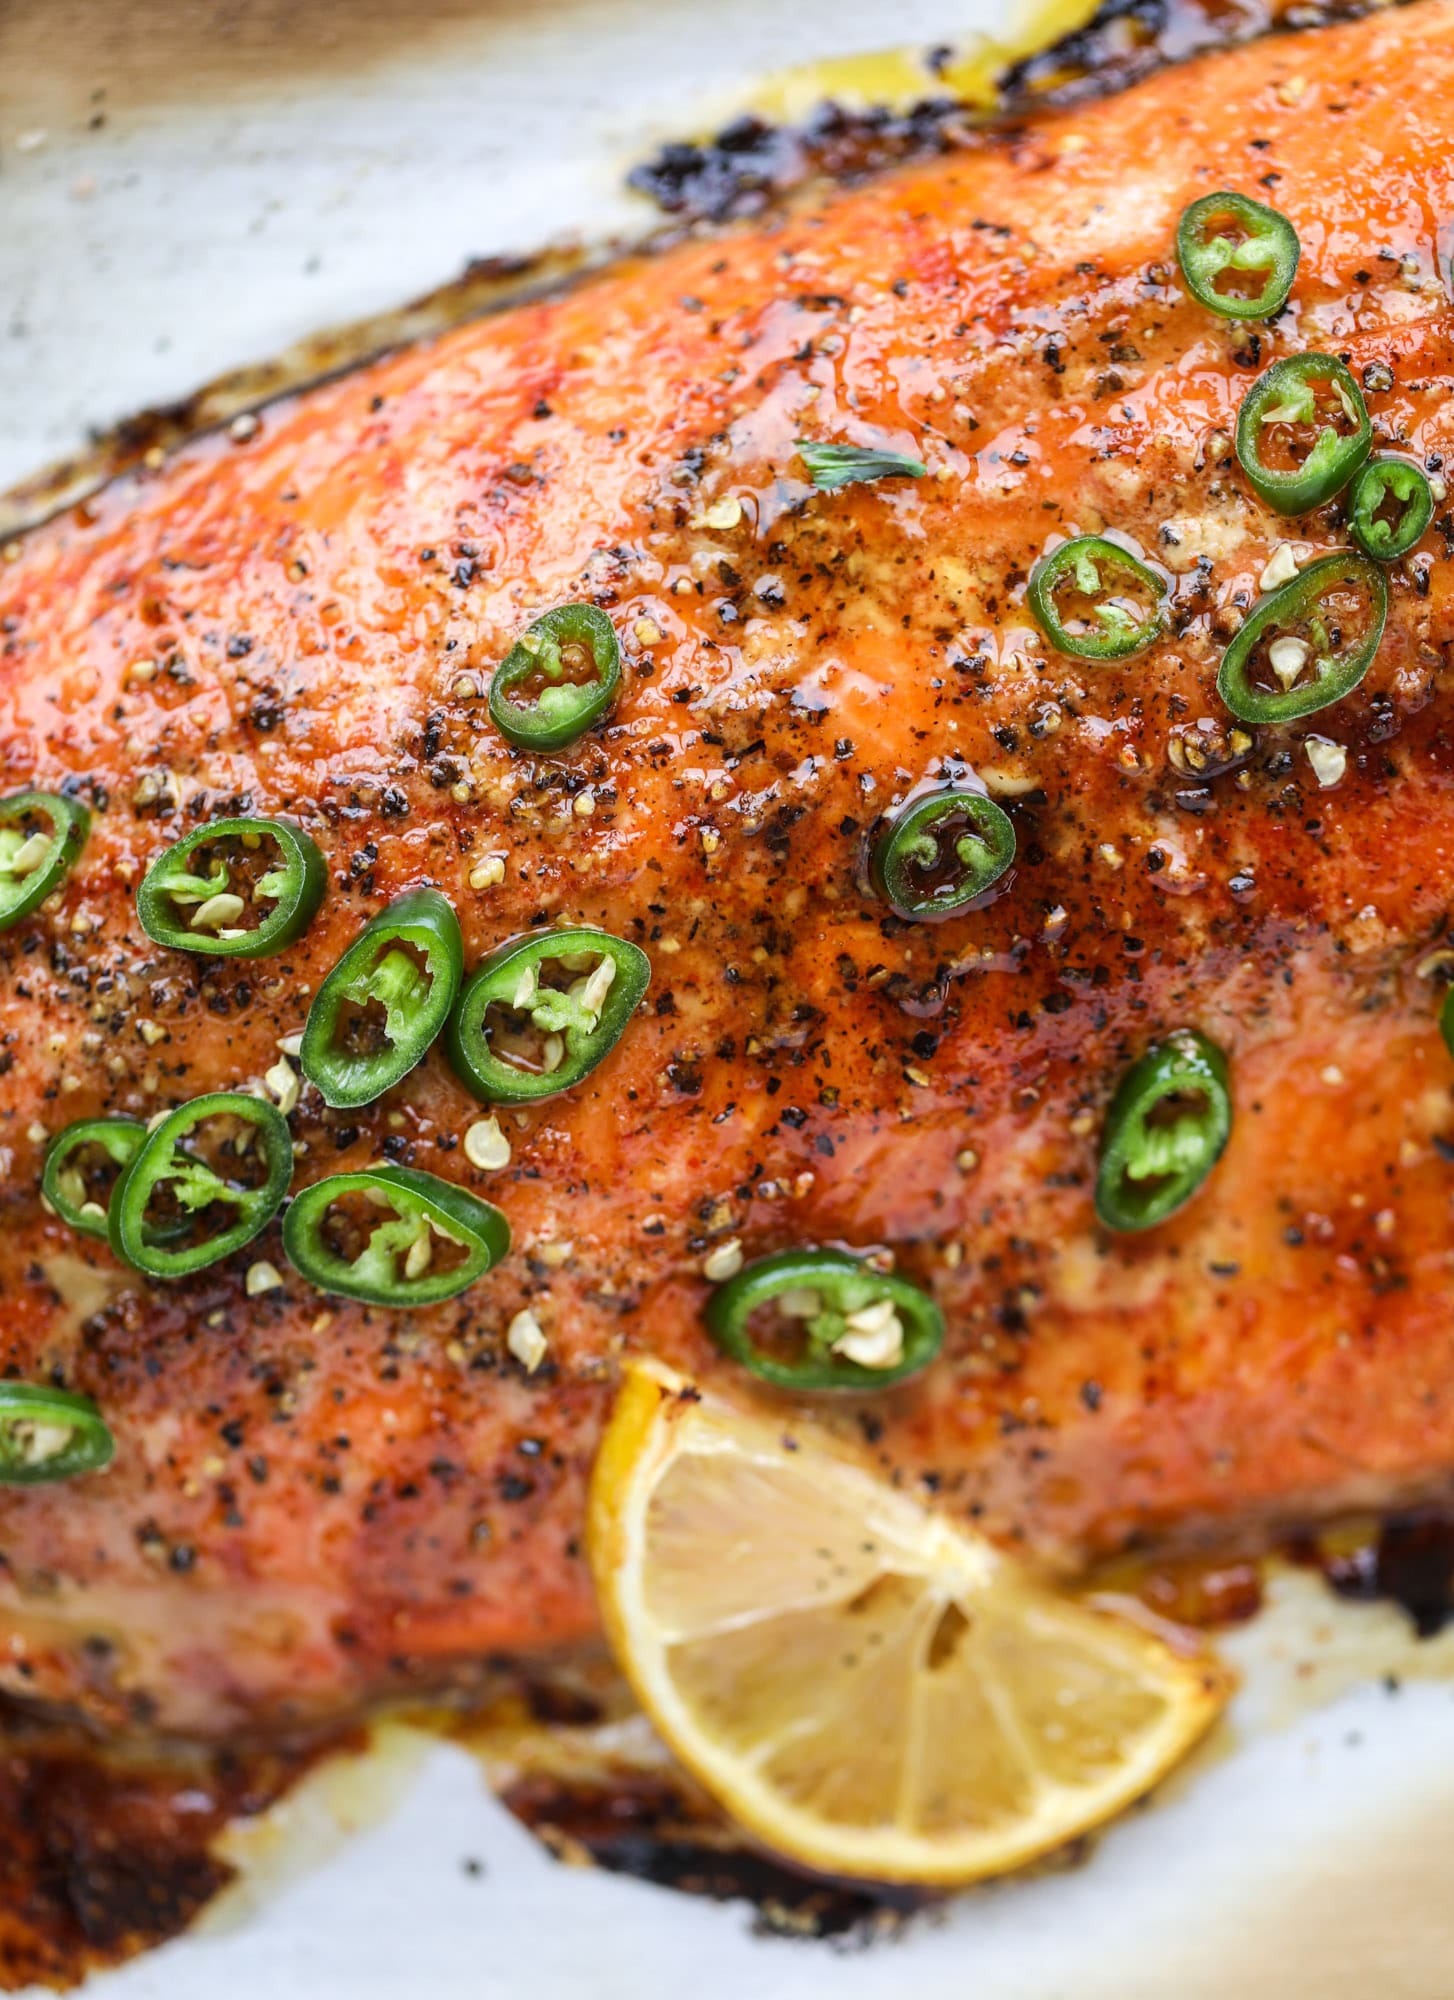 This hot honey salmon is flakey and buttery with a hint of heat and a sprtiz of lemon. It's an easy weeknight meal and is delicious on salads for lunch! I howsweeteats.com #hothoney #salmon